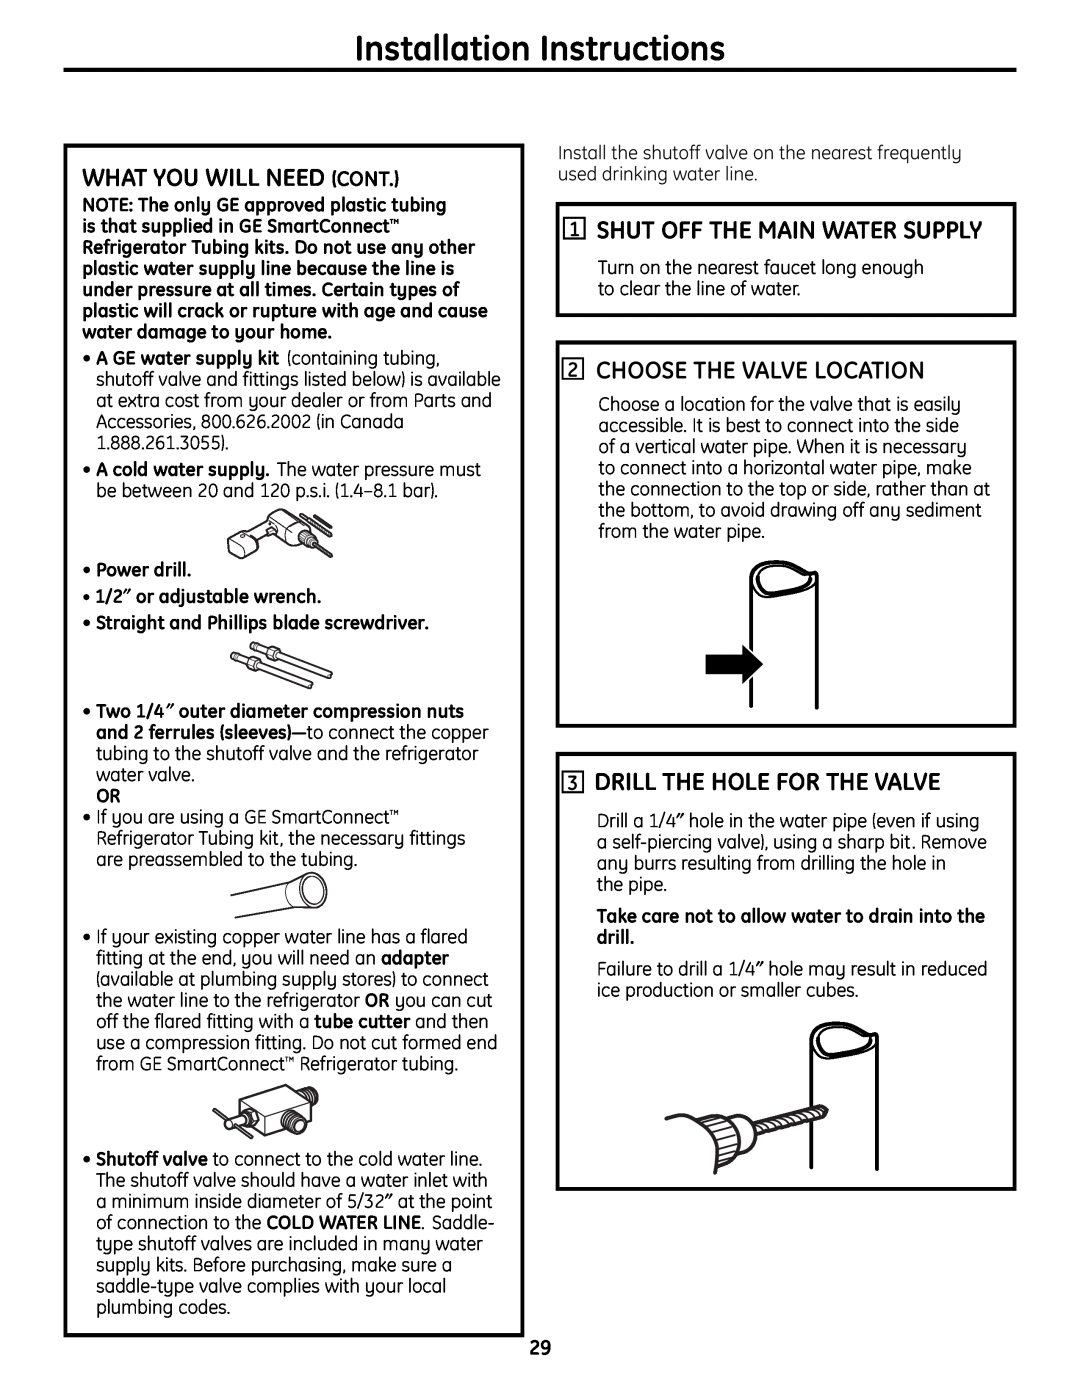 GE 200D9366P004 operating instructions What You Will Need Cont, Shut Off The Main Water Supply, Choose The Valve Location 